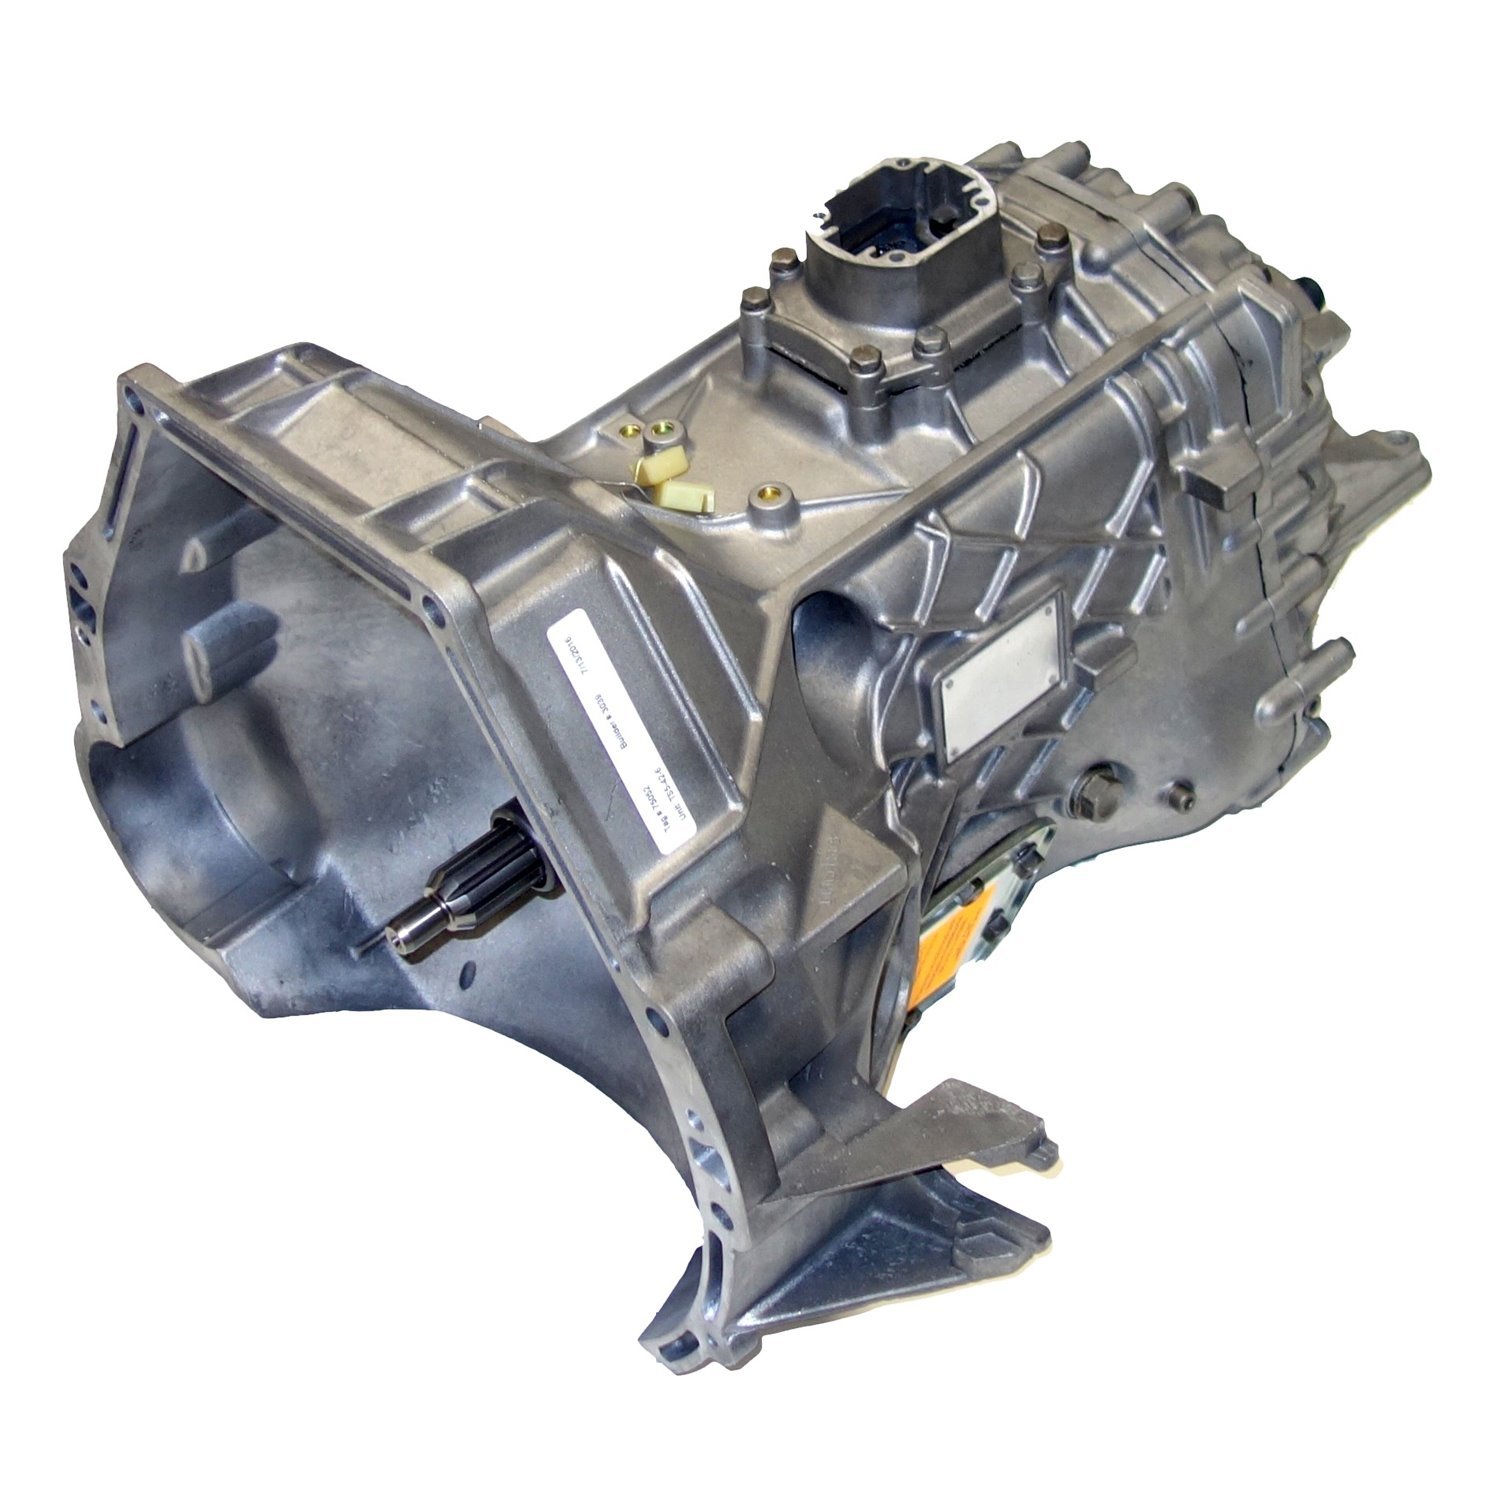 Remanufactured S5-42 Manual Transmission for Ford 87-92 F-series